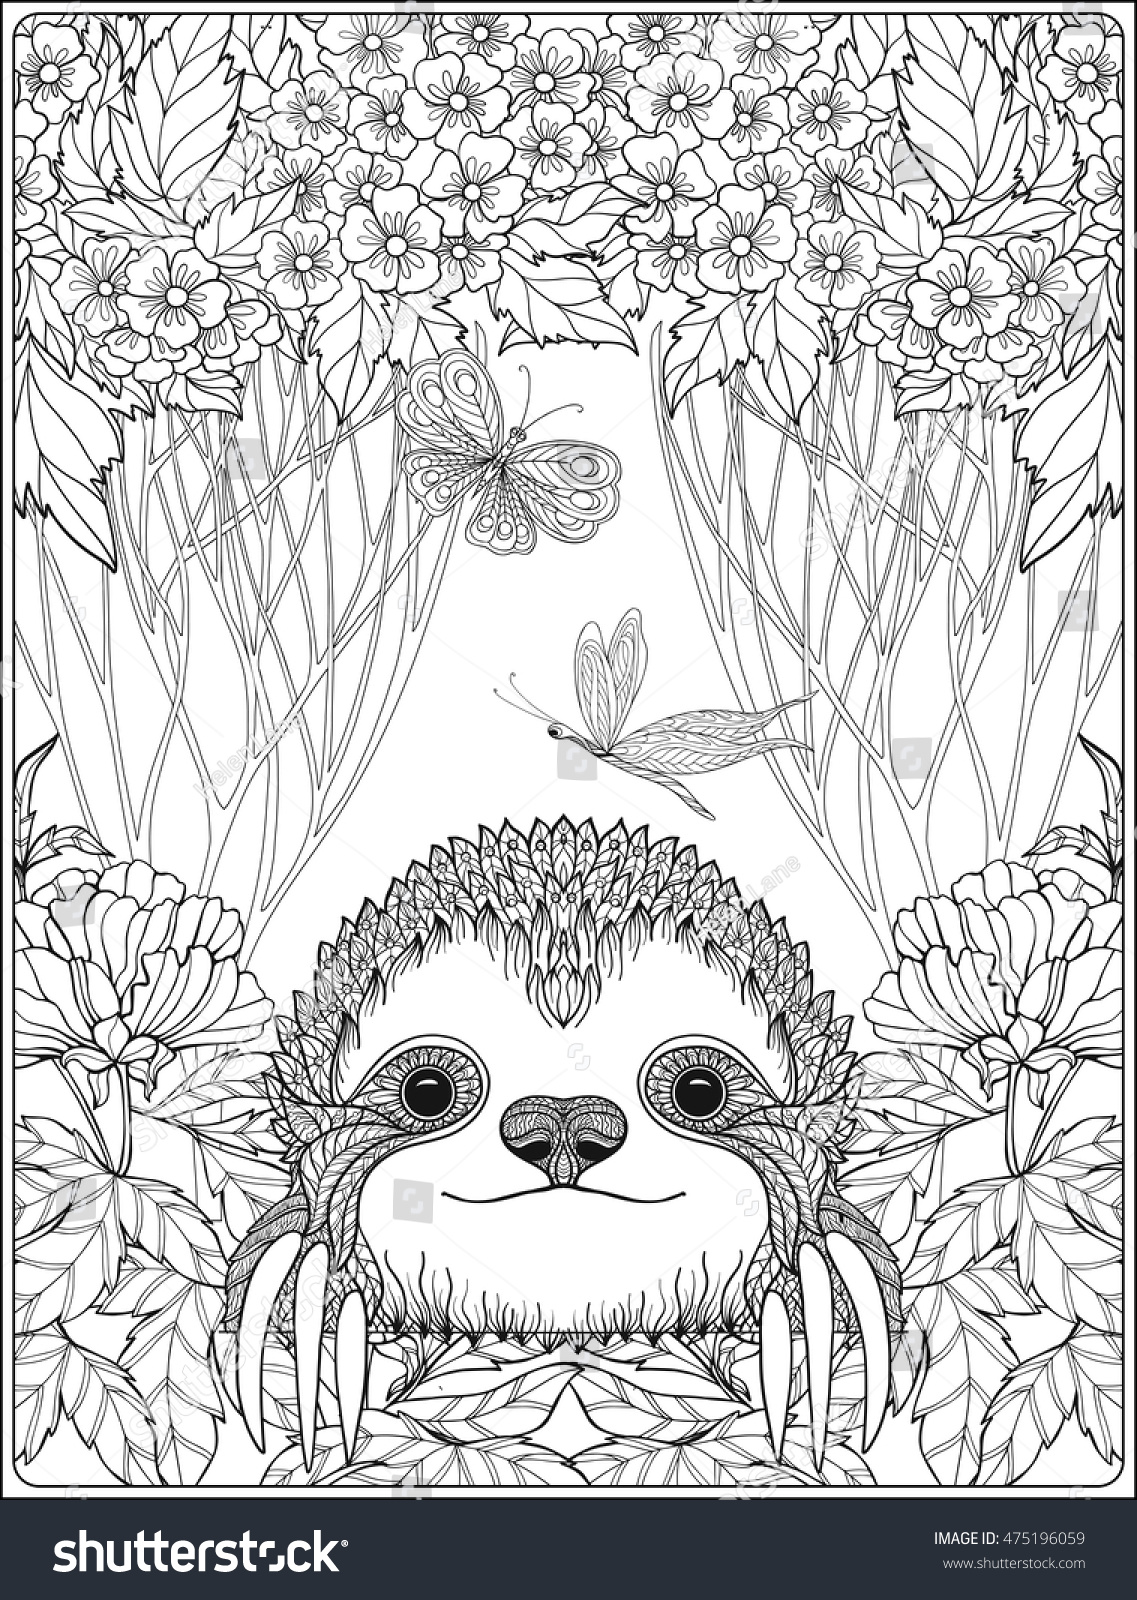 cute sloth in forest coloring page for adults  Shutterstock ...